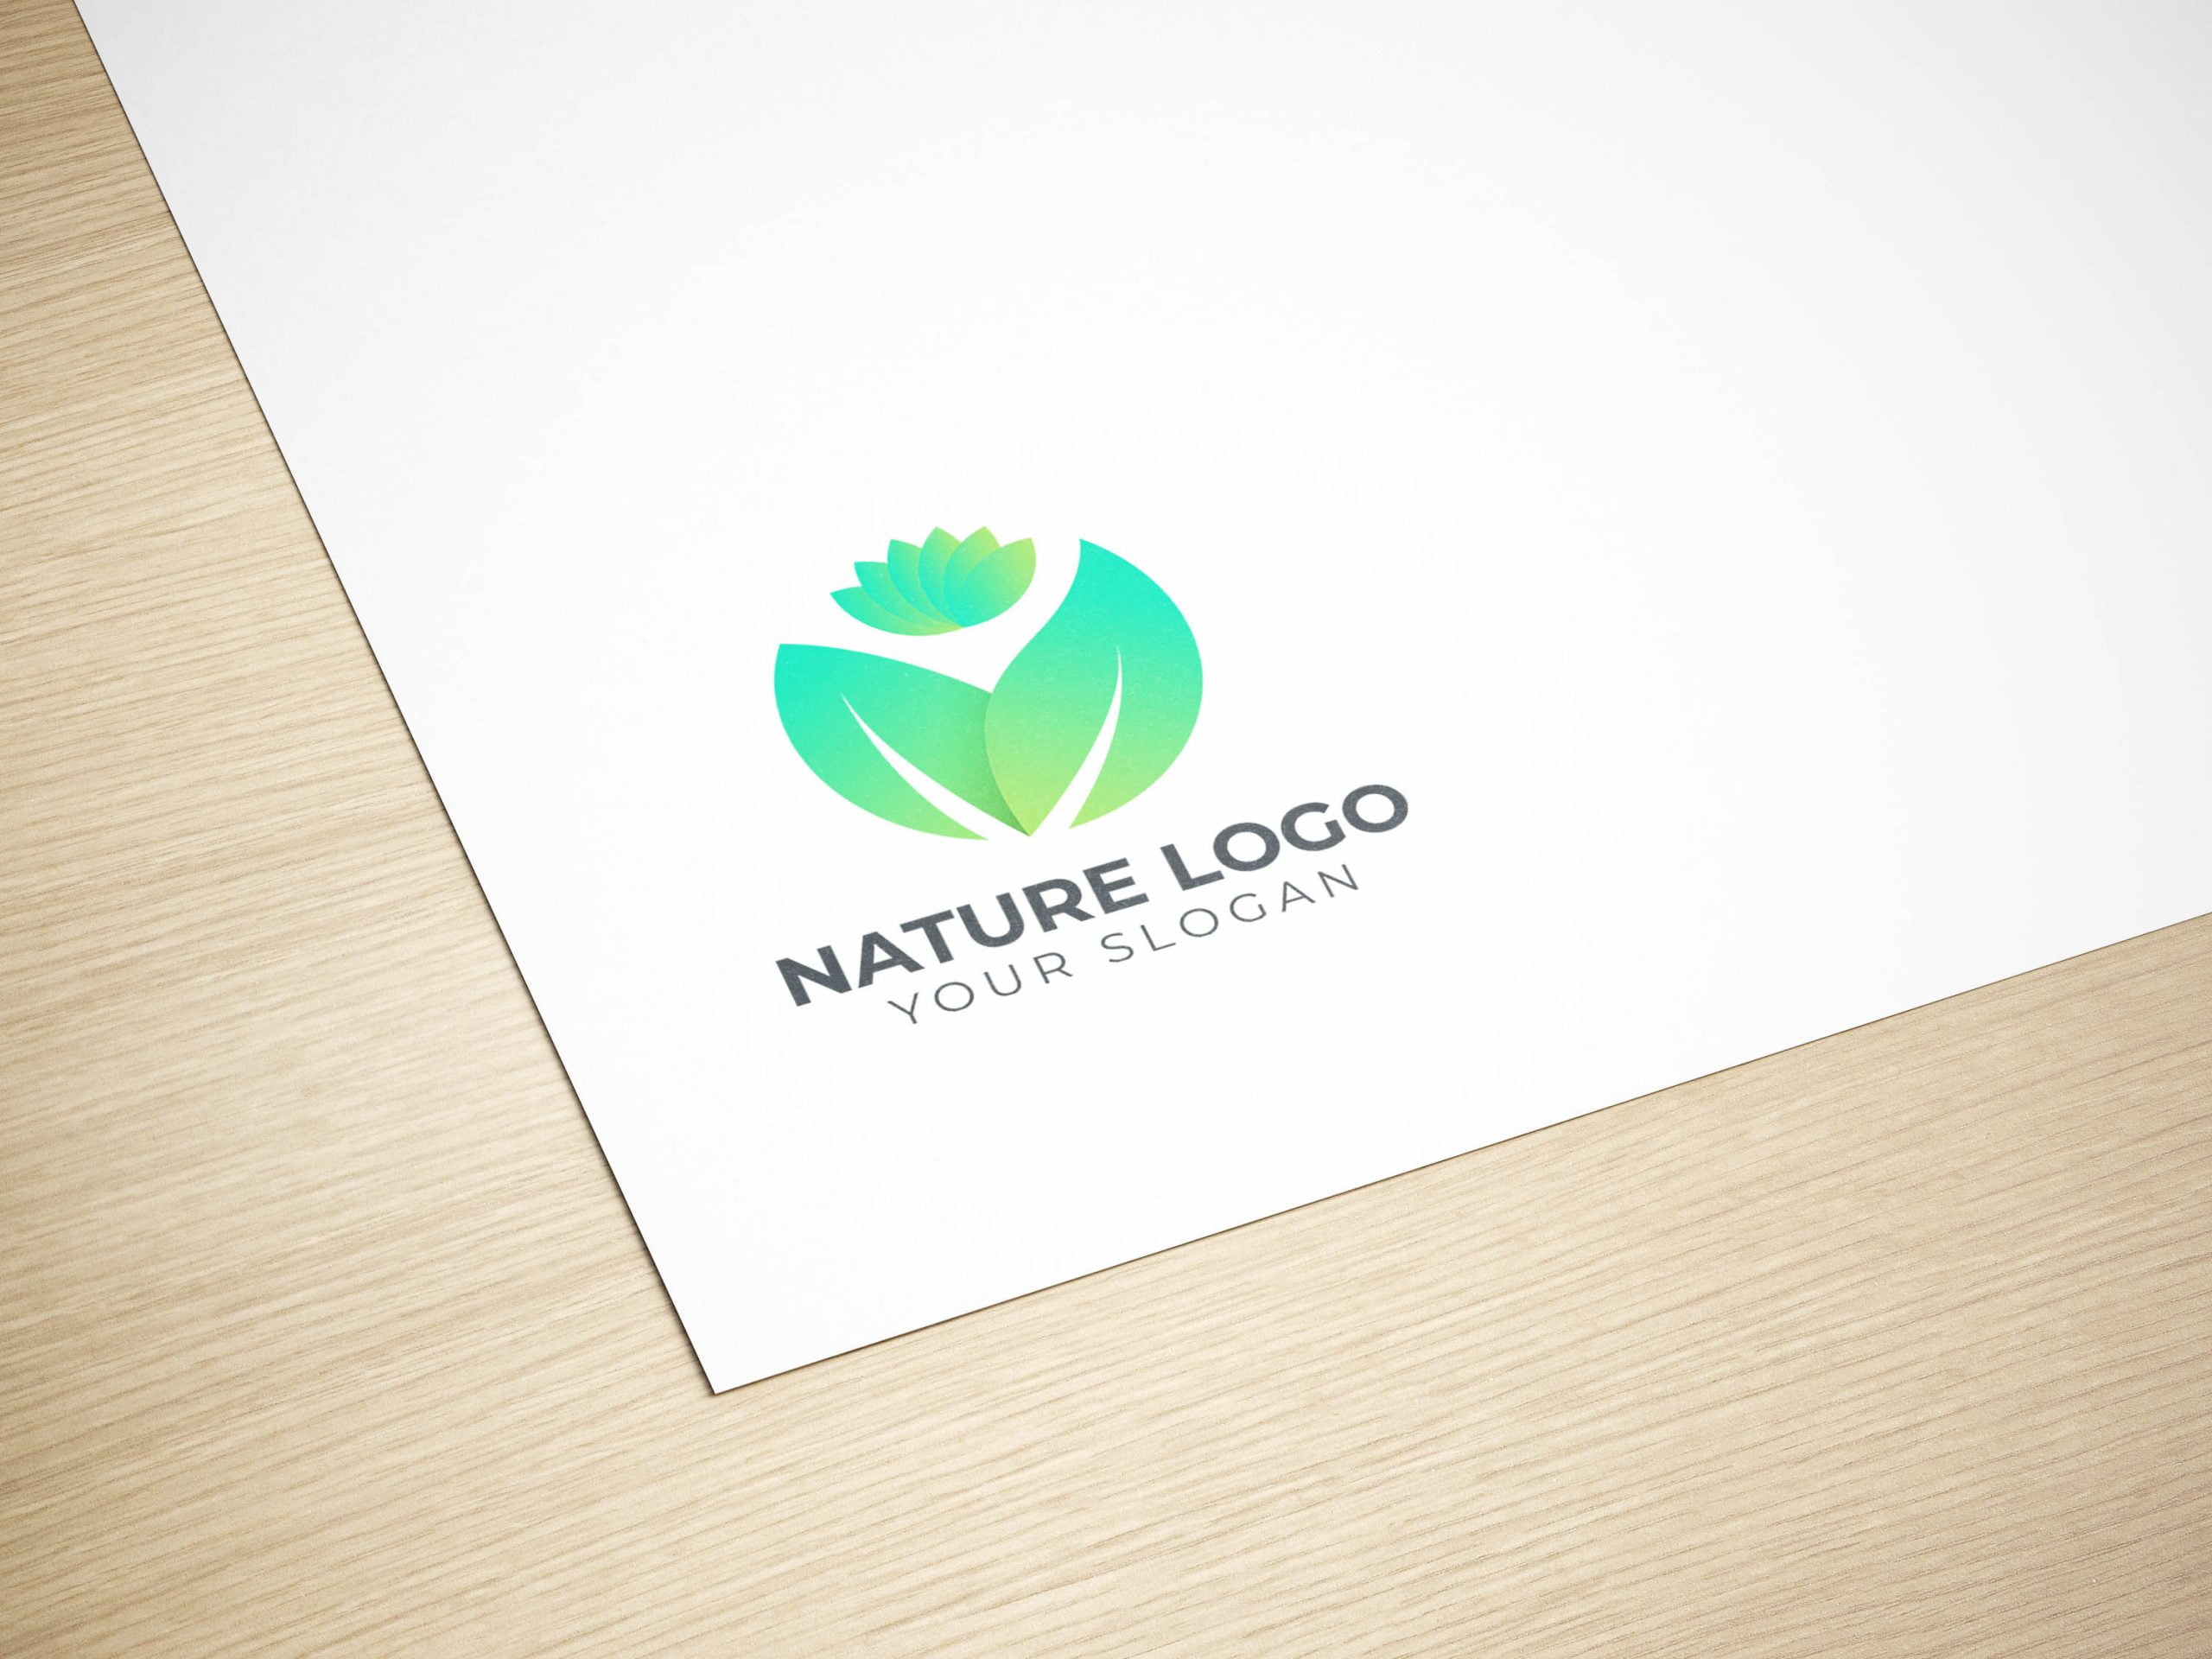 NATURE LOGO WITH PAPER MOCKUPS